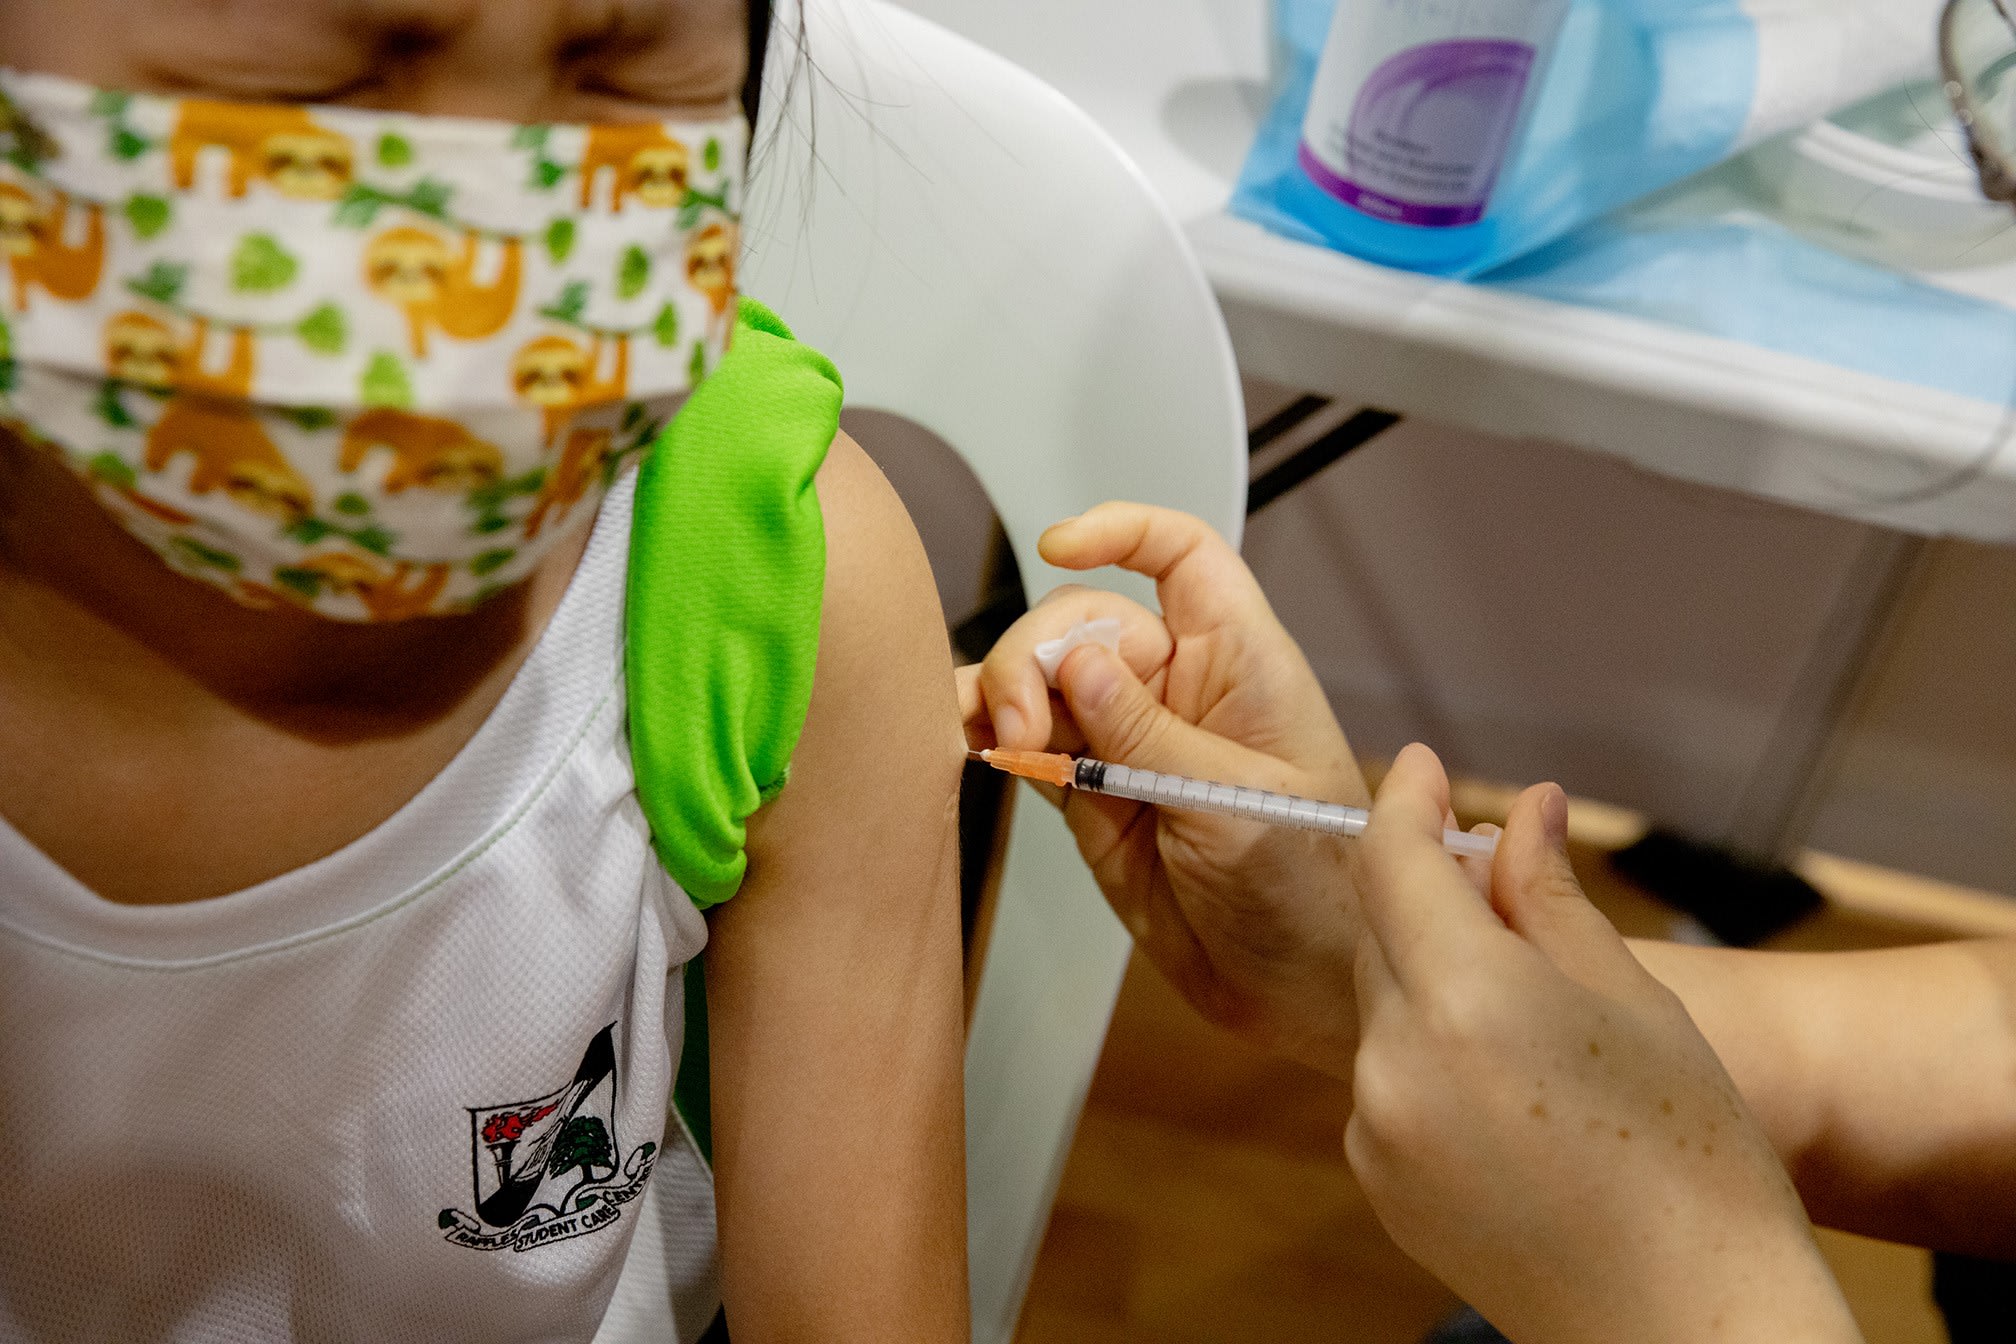 No serious side effects reported among vaccinated children in Singapore so far: MOH